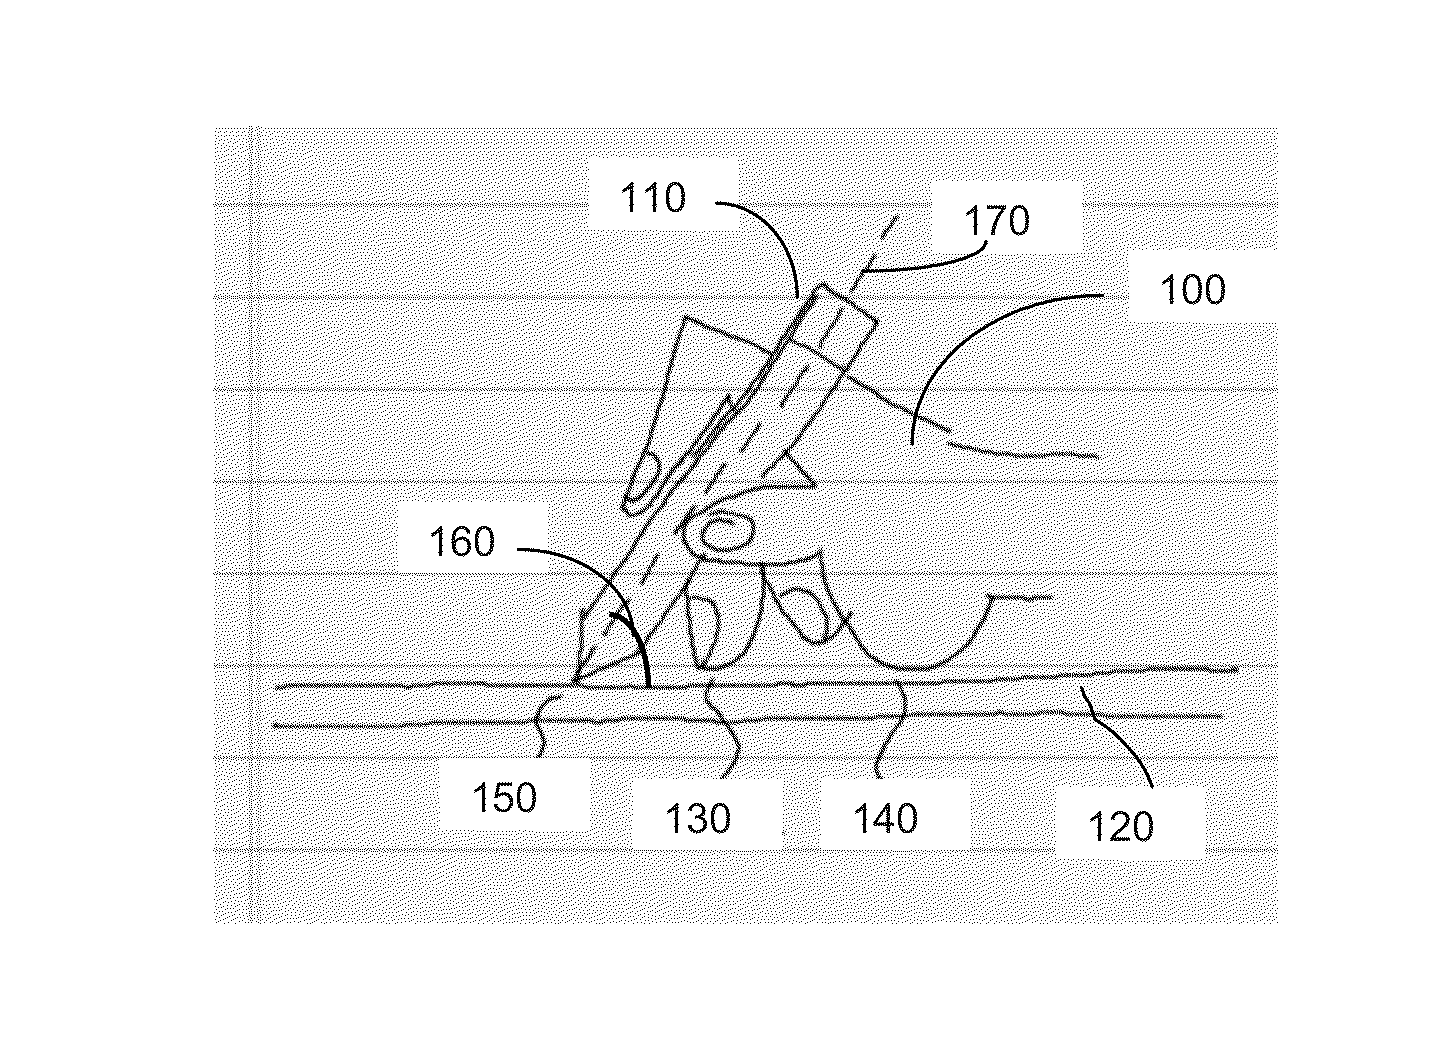 Pen interface for a touch screen device